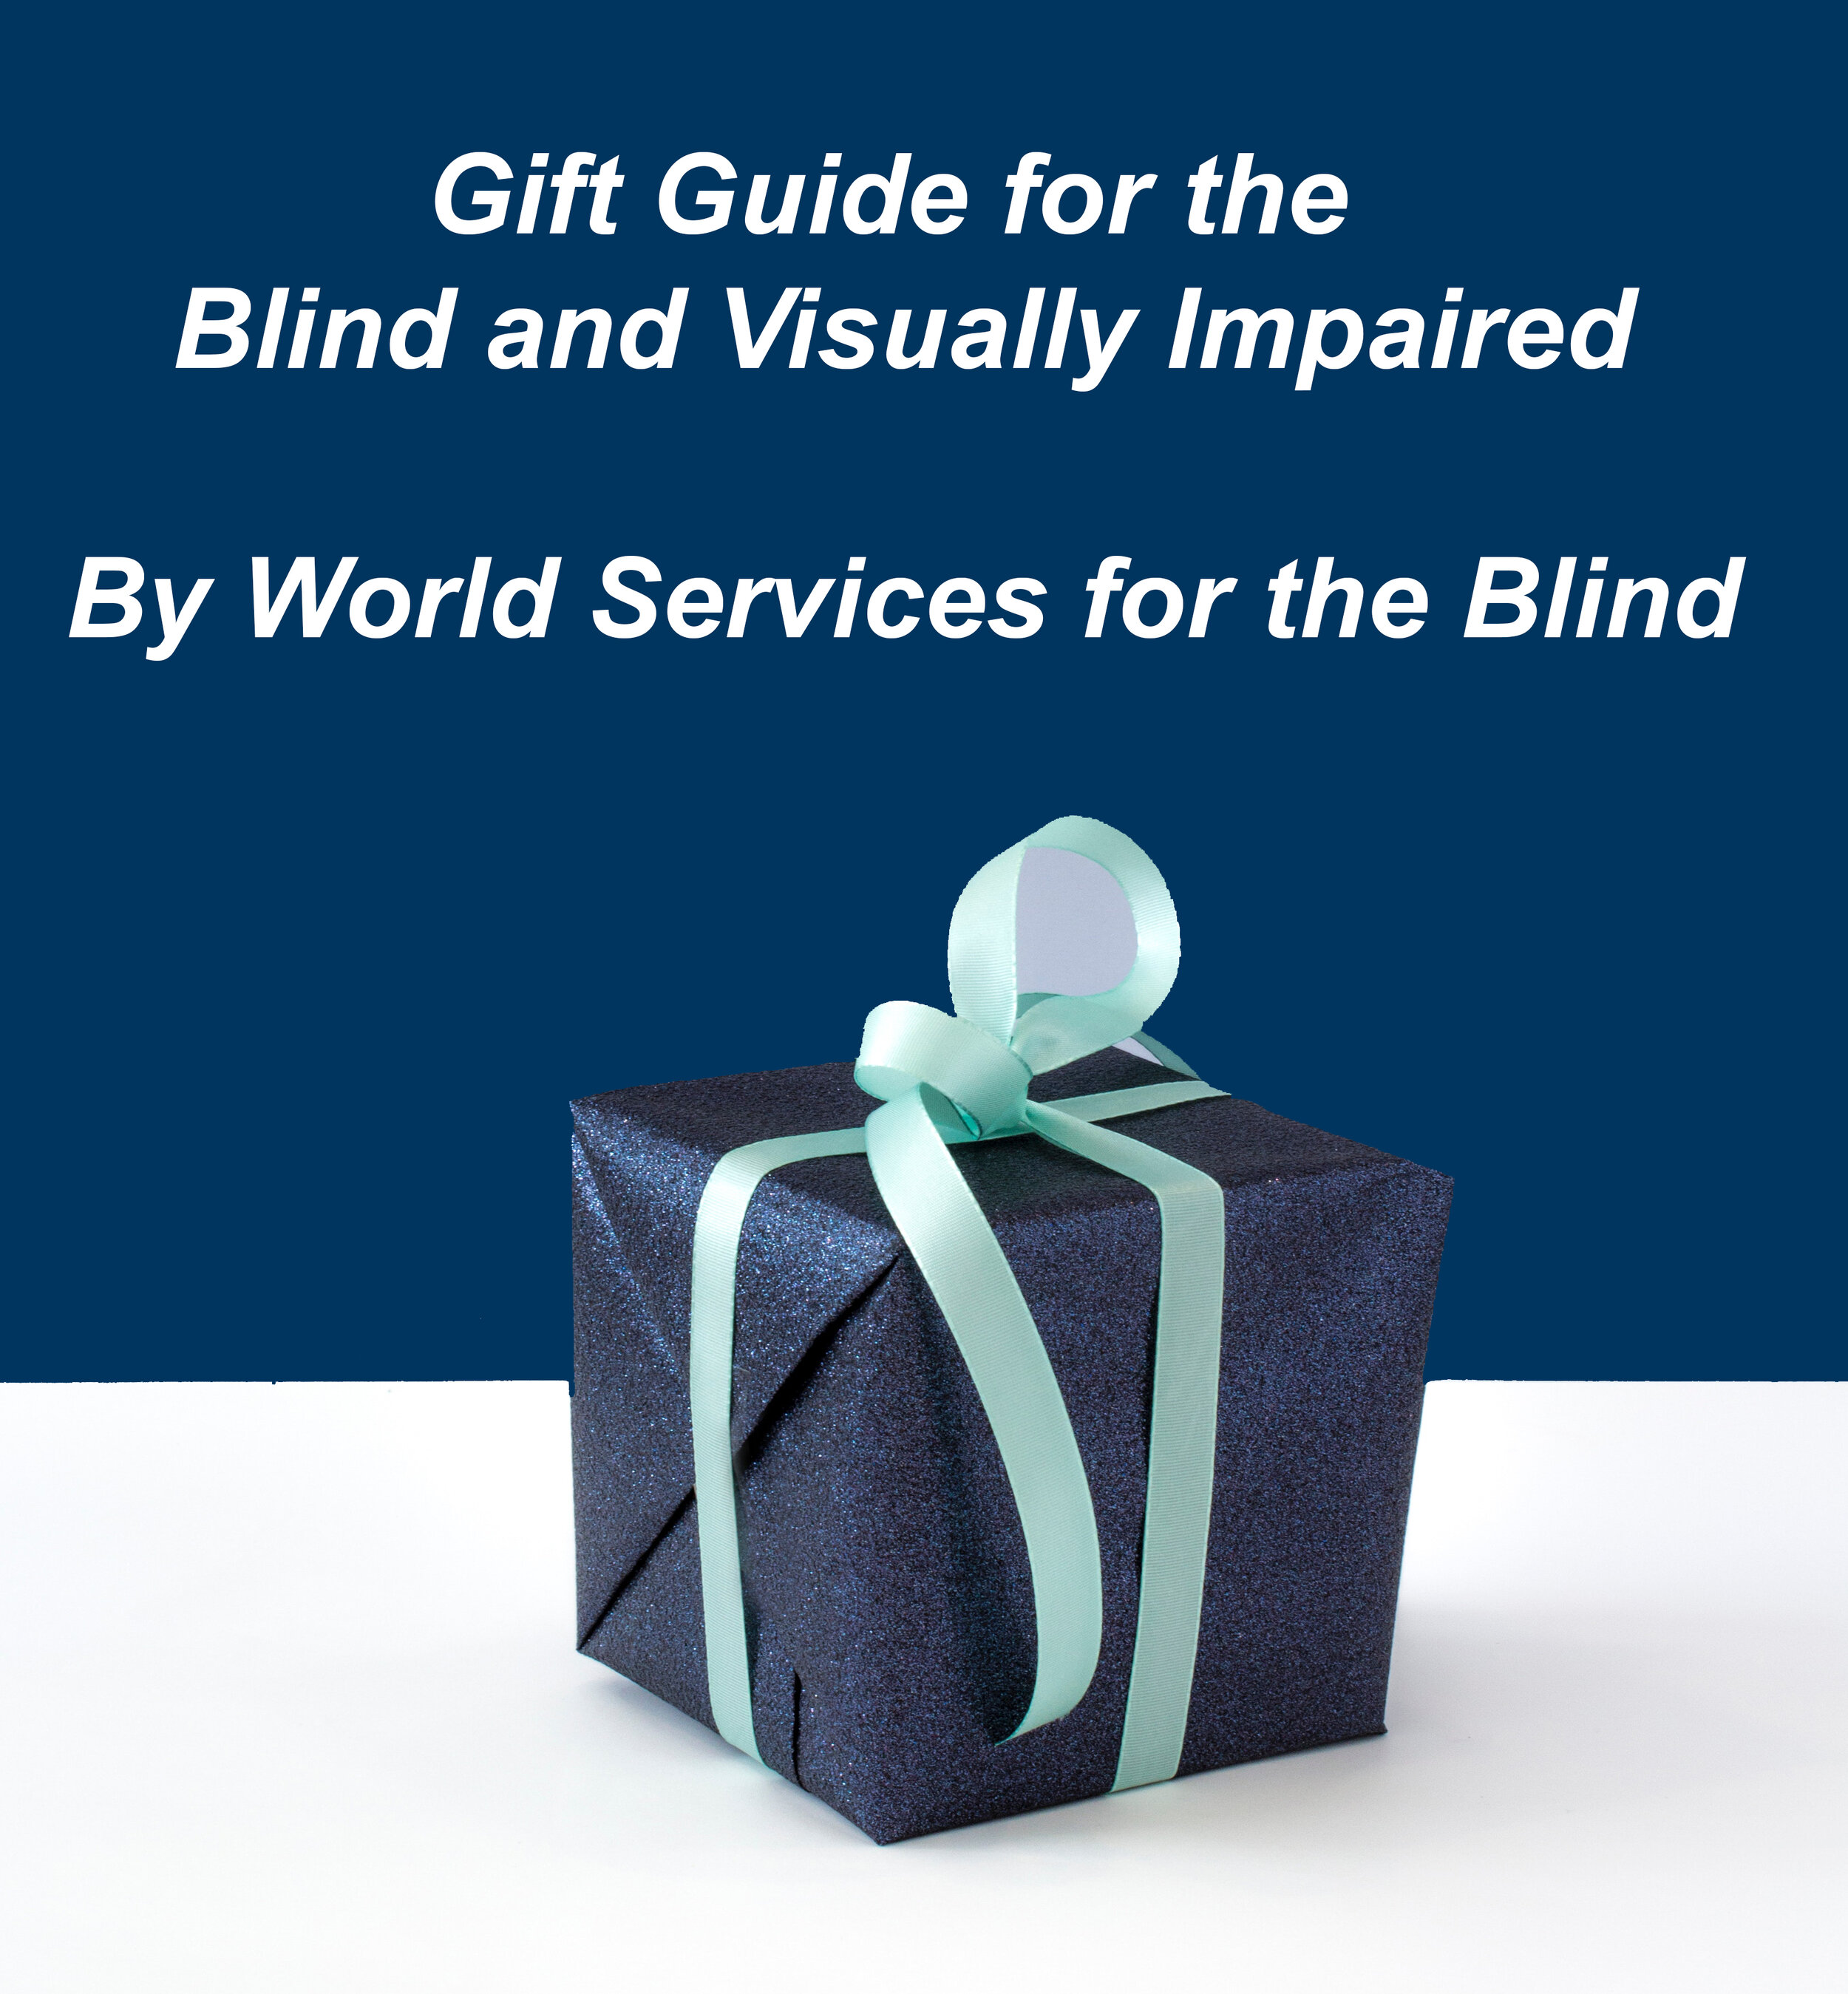 Gift Guide for Blind and Visually Impaired — World Services for the Blind